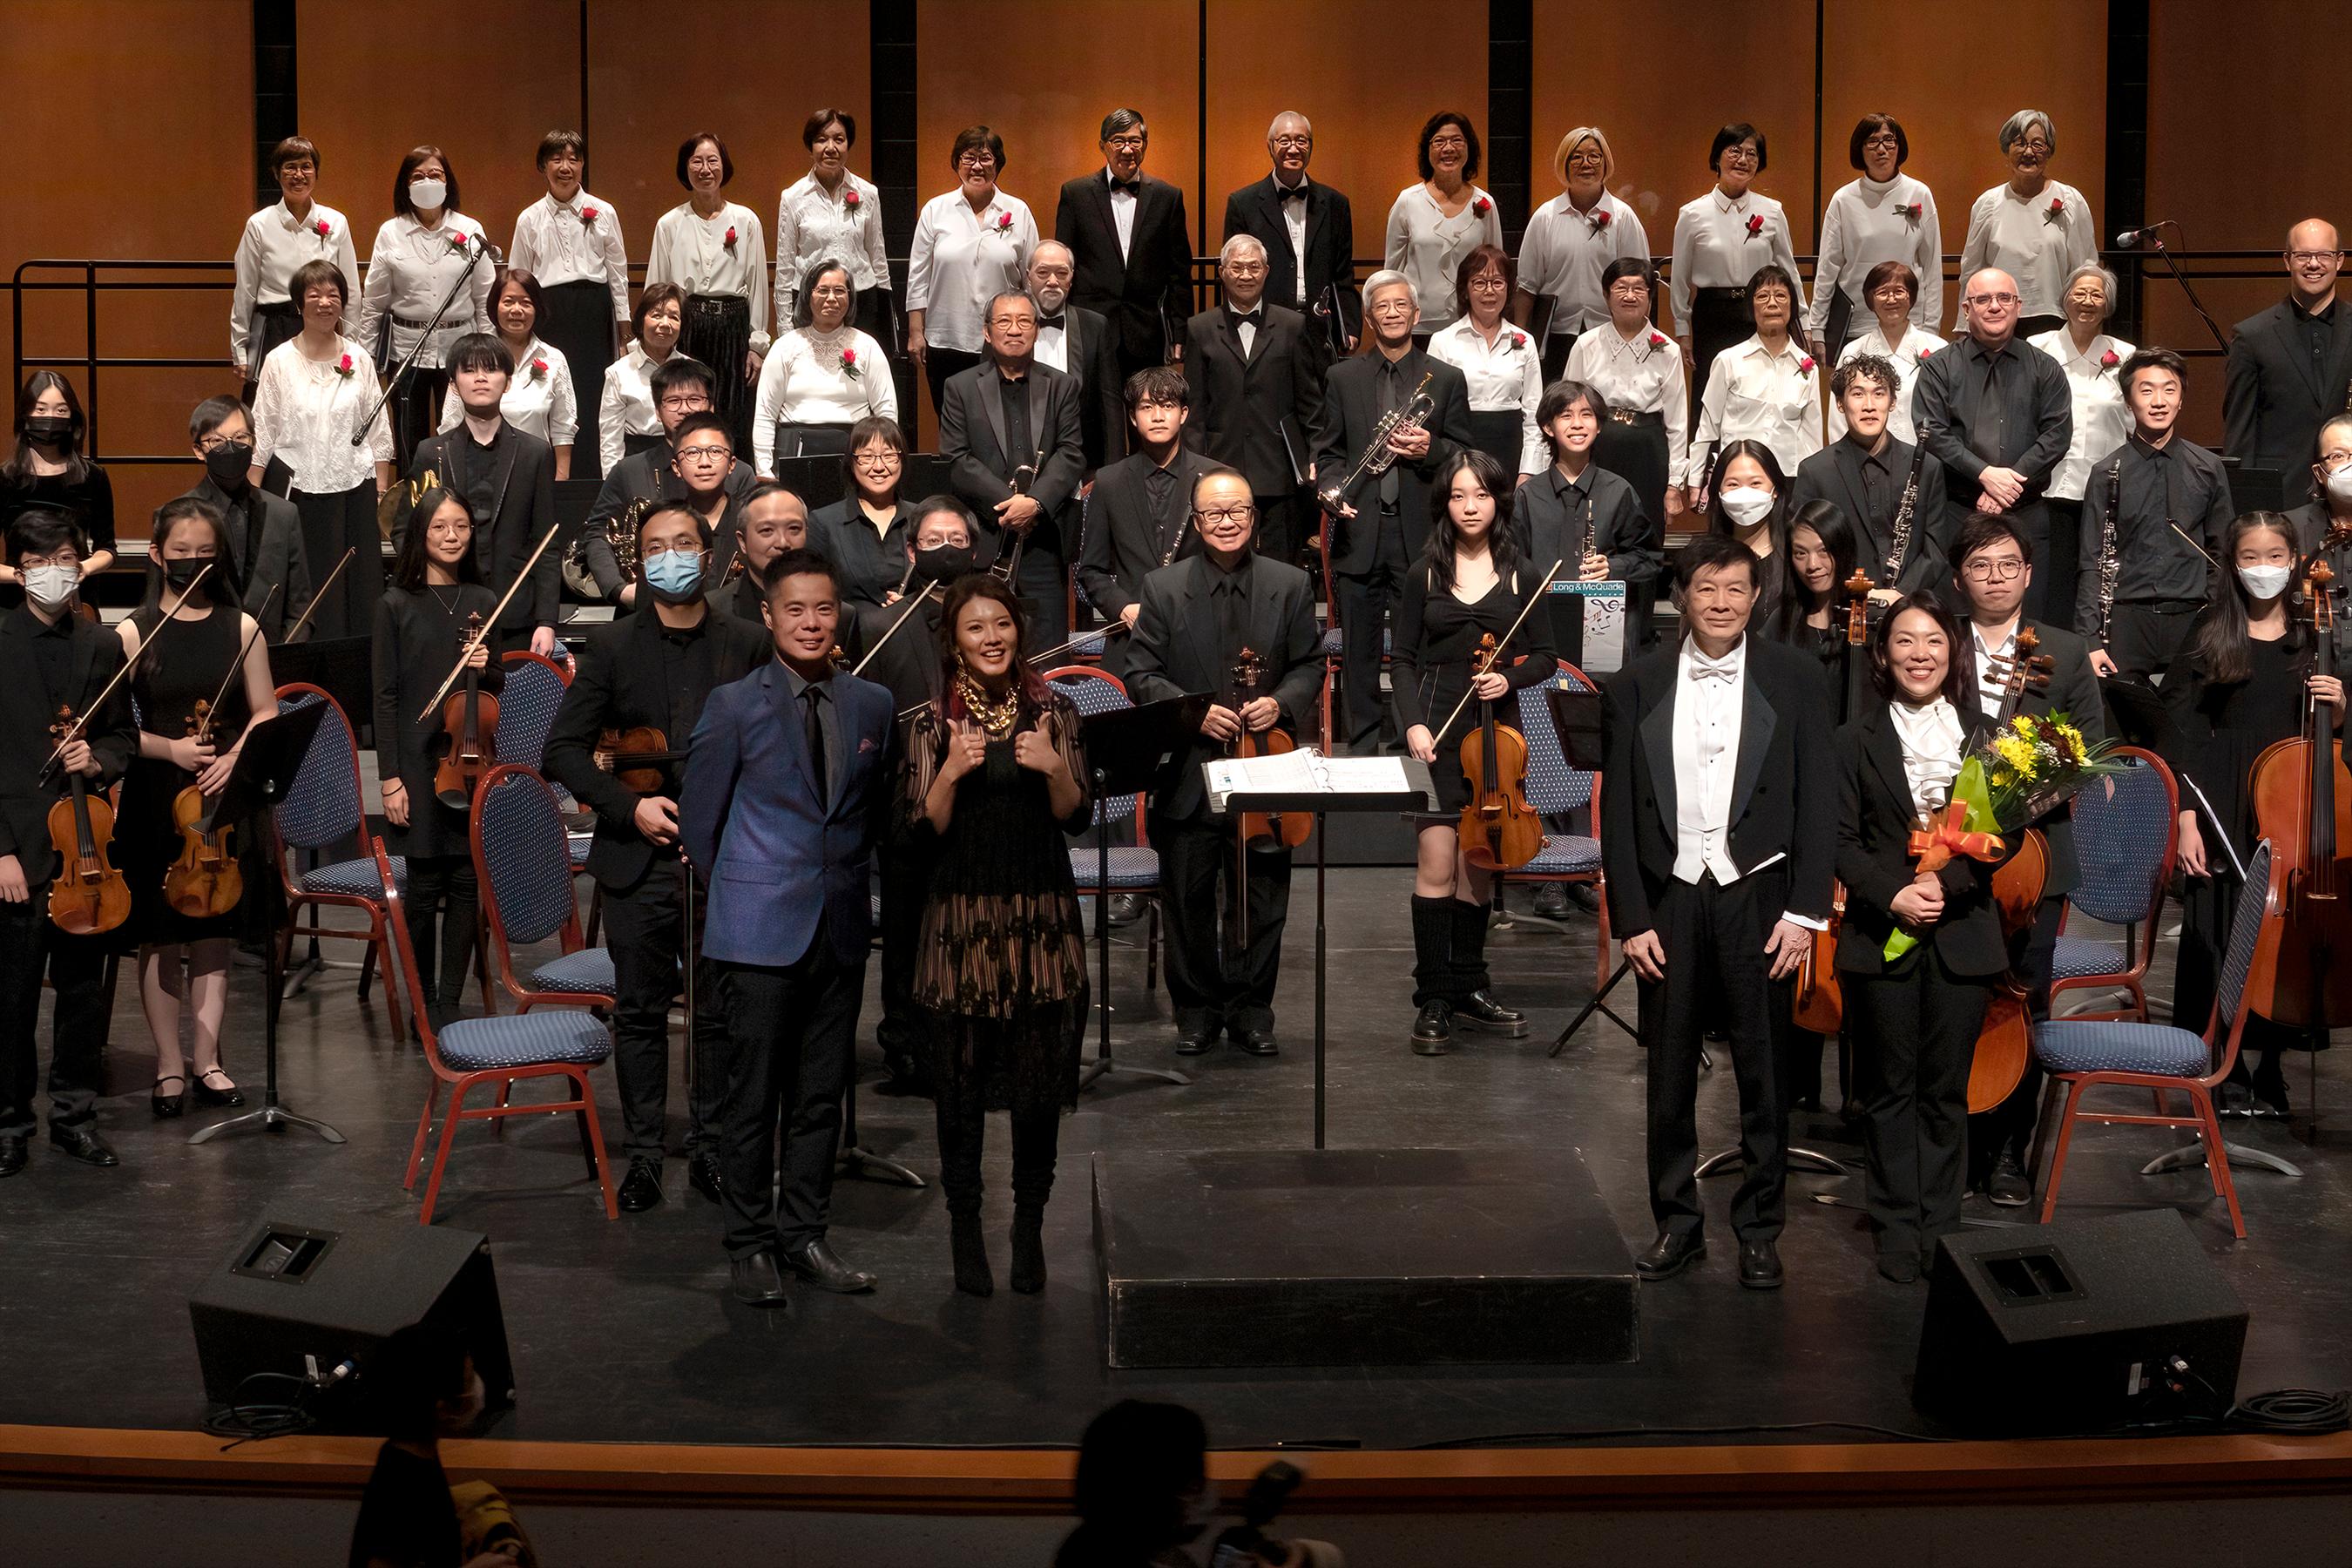 The Hong Kong Economic and Trade Office (Toronto) supported the concert titled "Dawn" at P.C. Ho Theatre of the Chinese Cultural Centre of Greater Toronto in Toronto on October 16 (Toronto time) to showcase the close cultural ties between Hong Kong and Canada. Photo shows over 60 symphony orchestra and choir members from the Ontario Cross-Cultural Music Society at stage with singers Mr Roger Feng (front row, first left) and Ms Wendyz Zheng (first row, second left) as well as conductors Mr Ken Zheng (front row, second right) and Ms Joanna Ng D'Agnone (front row, first right).